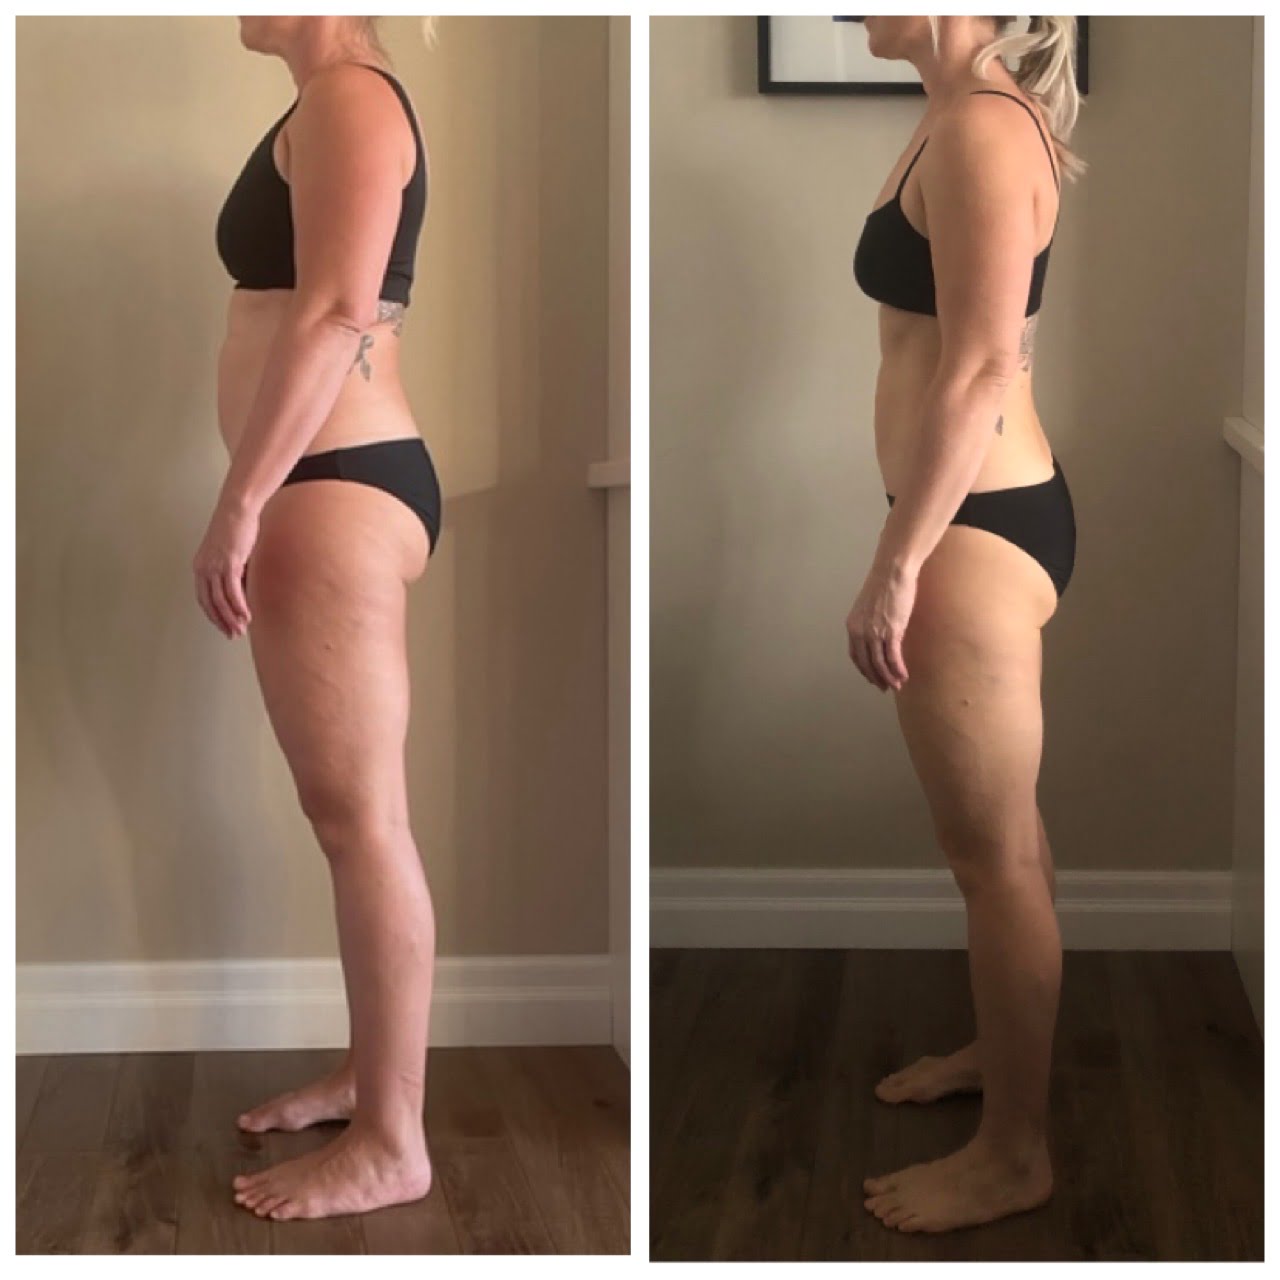 Melissa accomplished body recomp with MacroNutrition